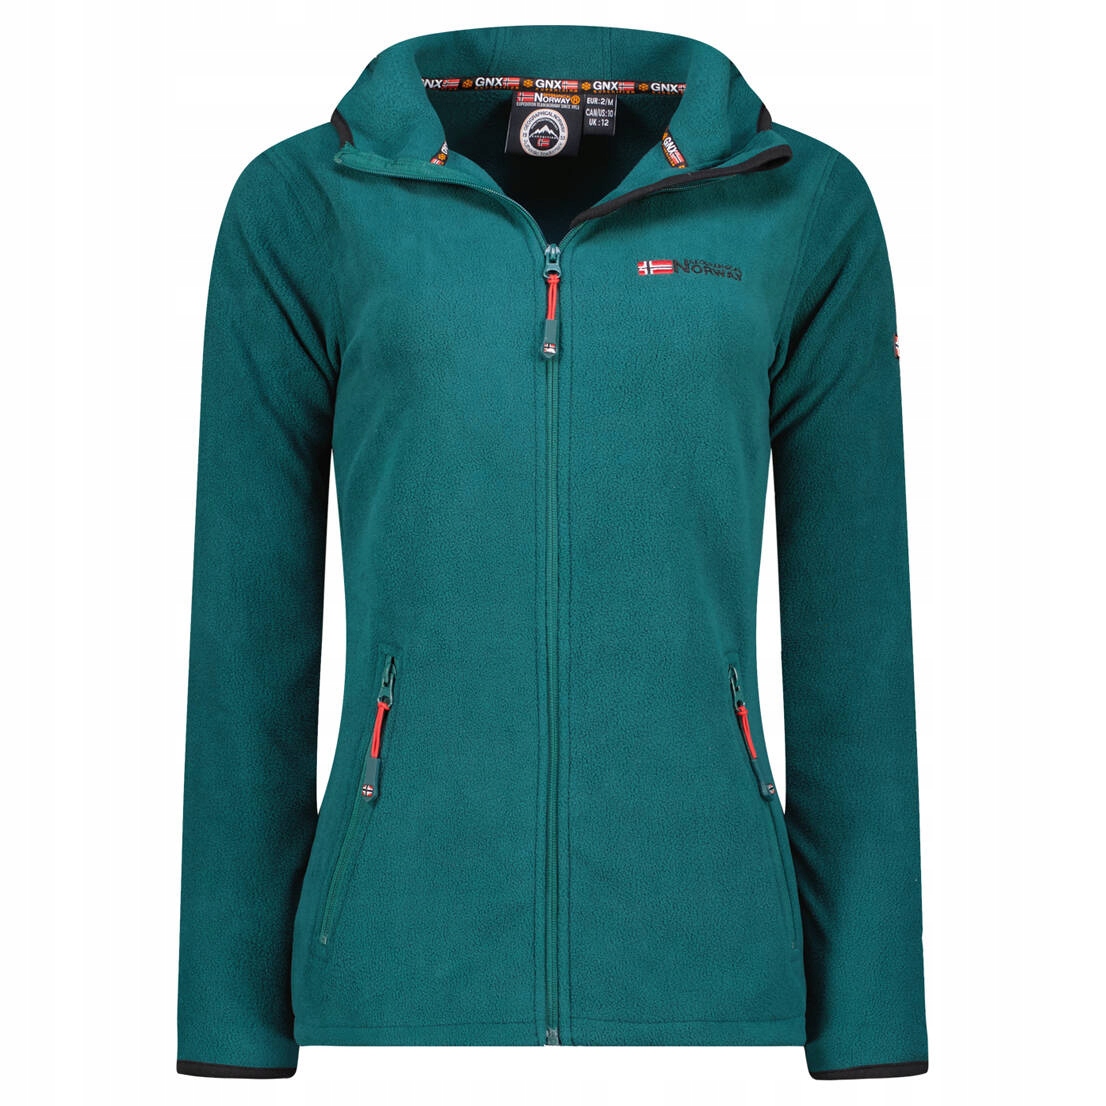 Mikina Geographical Norway UNICIA LADY 224 WX3714F/GN TREKINGOVÁ OUTDOOR